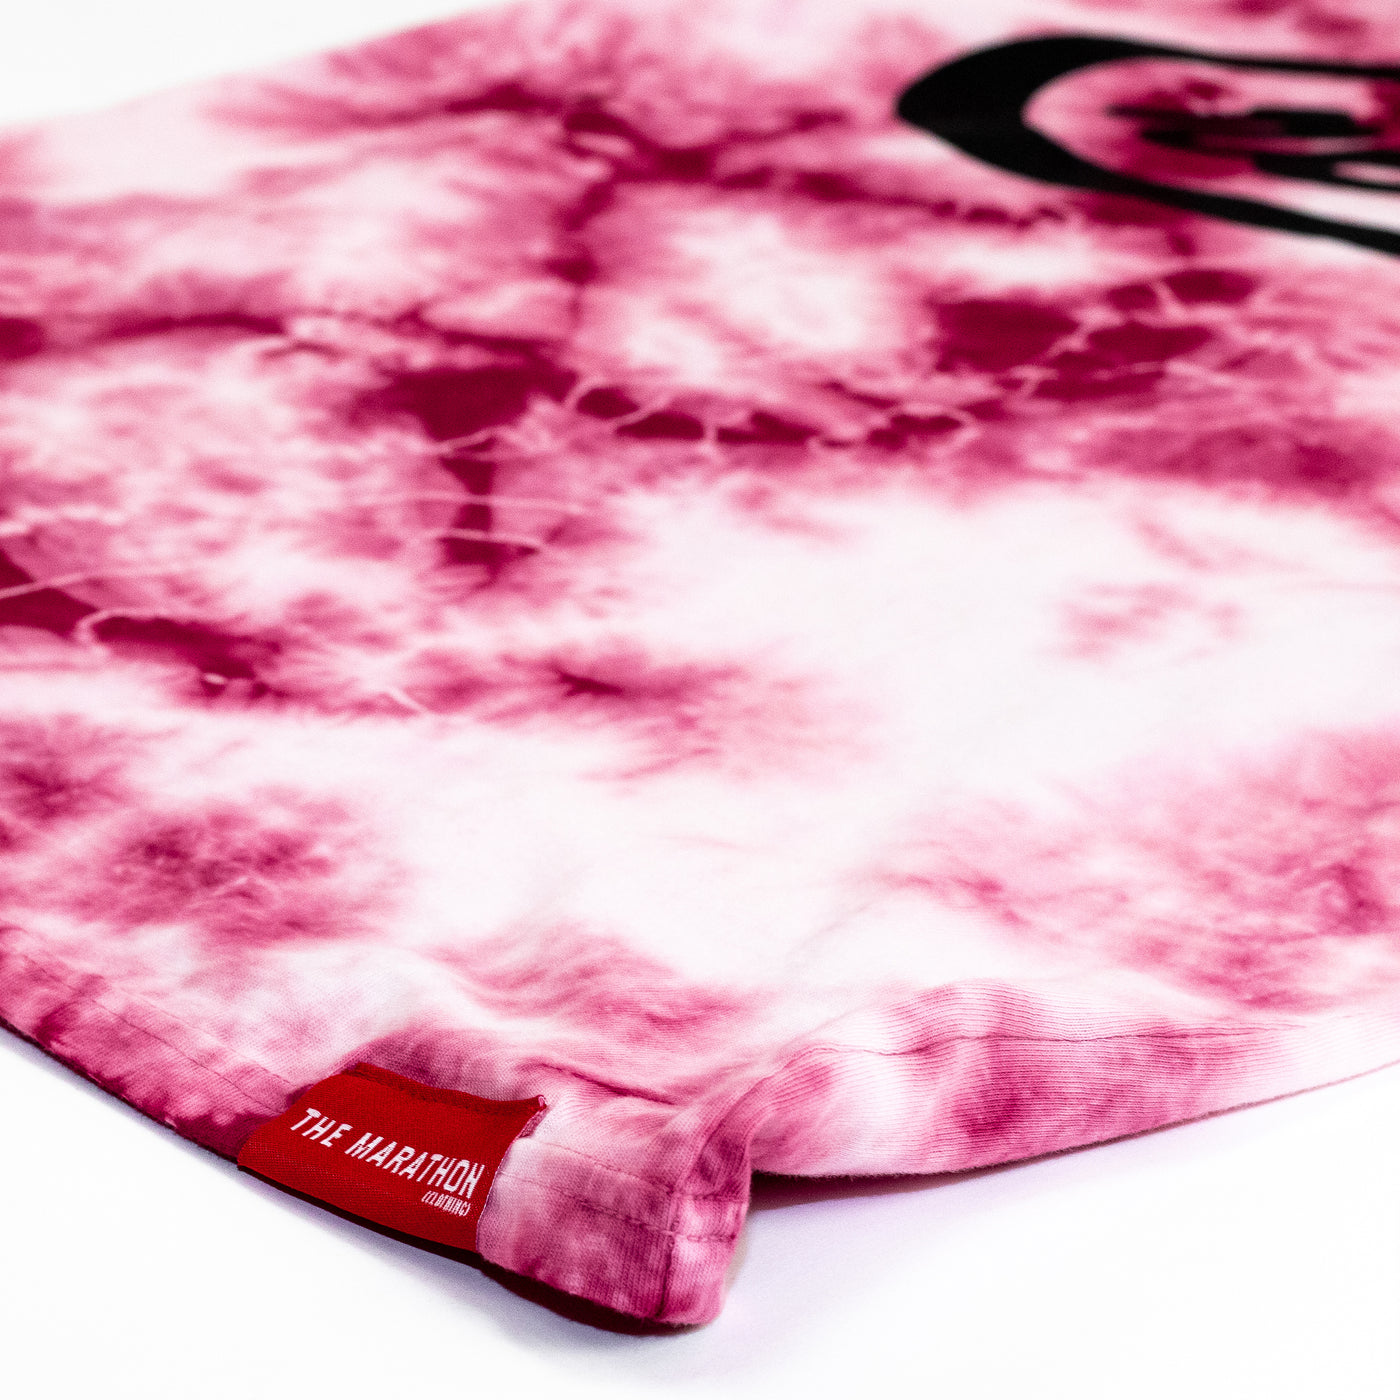 Crenshaw Limited Edition T-shirt - White/Red Tie Dye - Detail 2